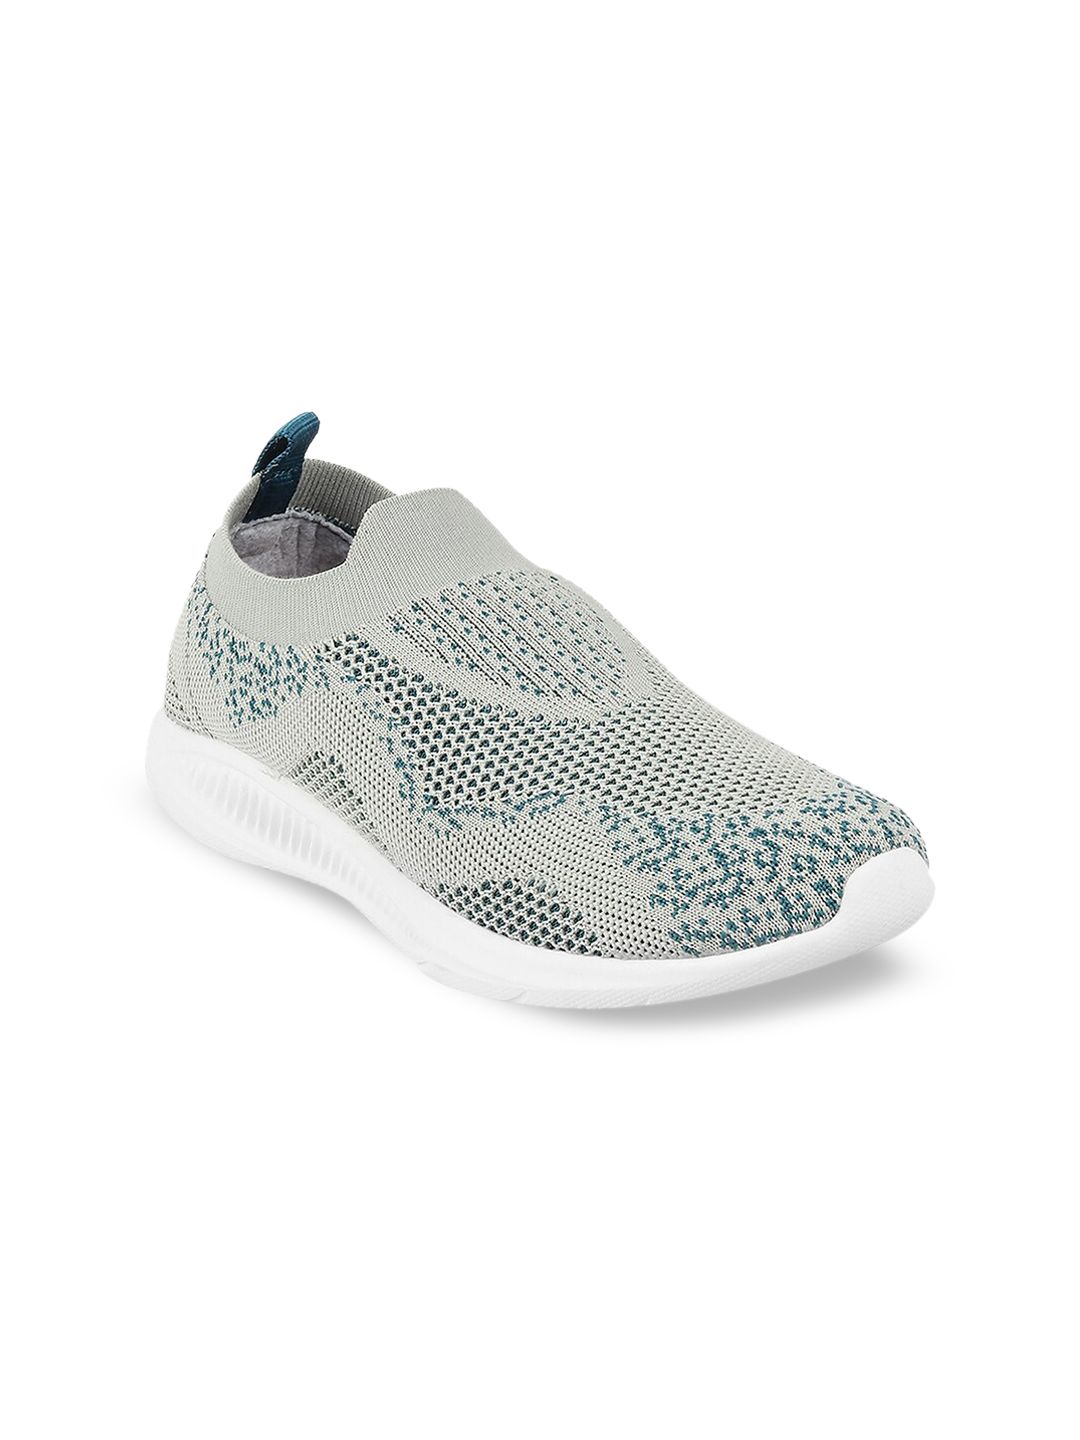 ACTIV Women Green Woven Design Slip-On Sneakers Price in India